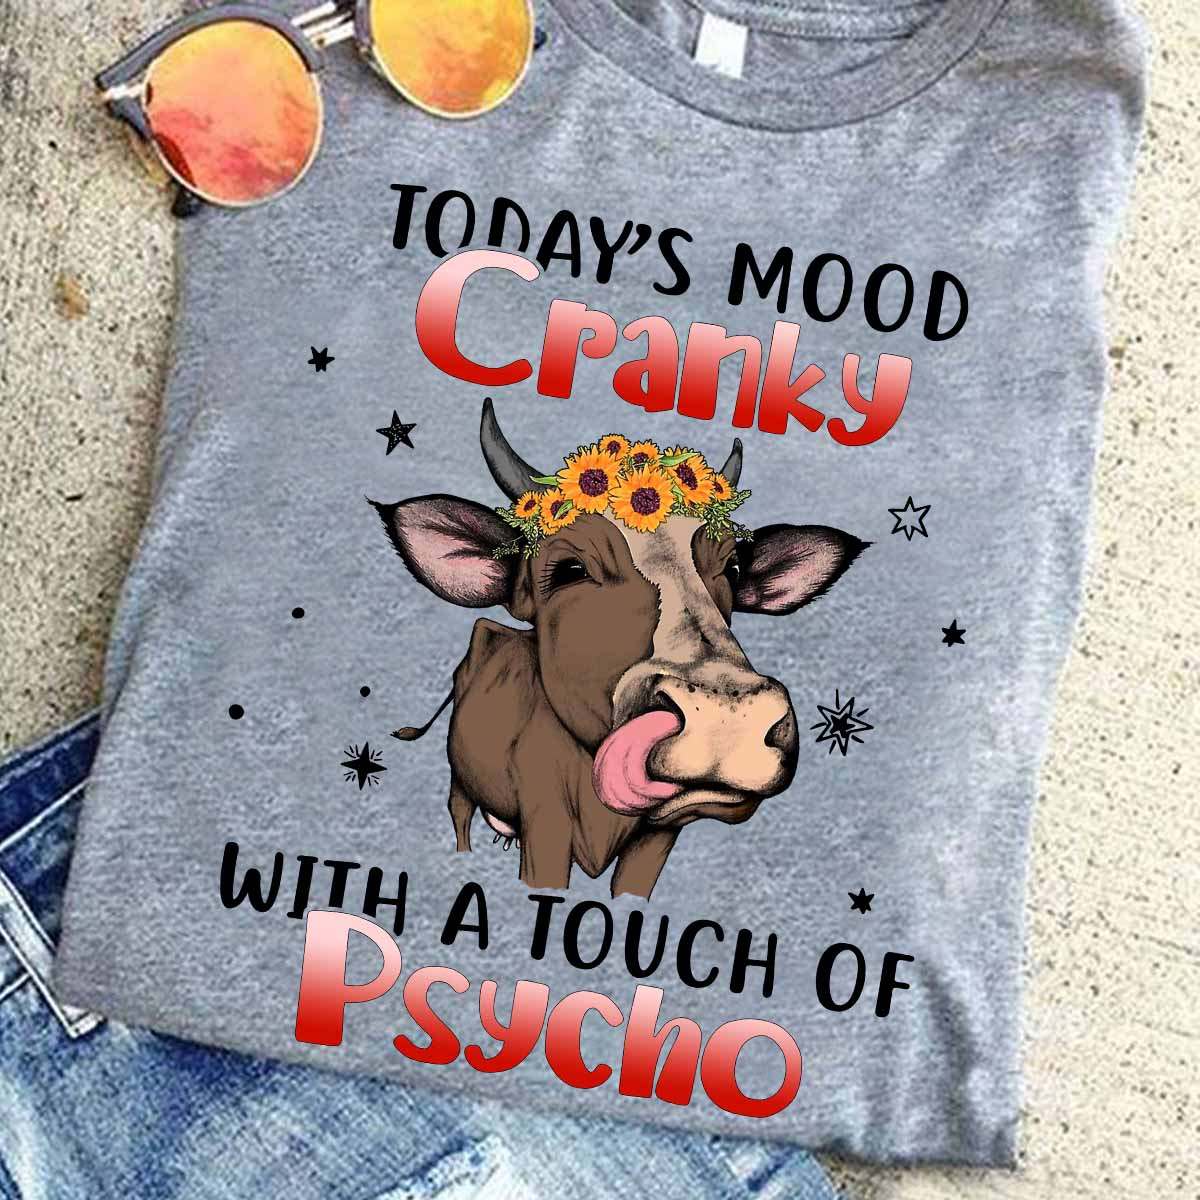 Today's mood cranky with a touch of Psycho - Cranky cow